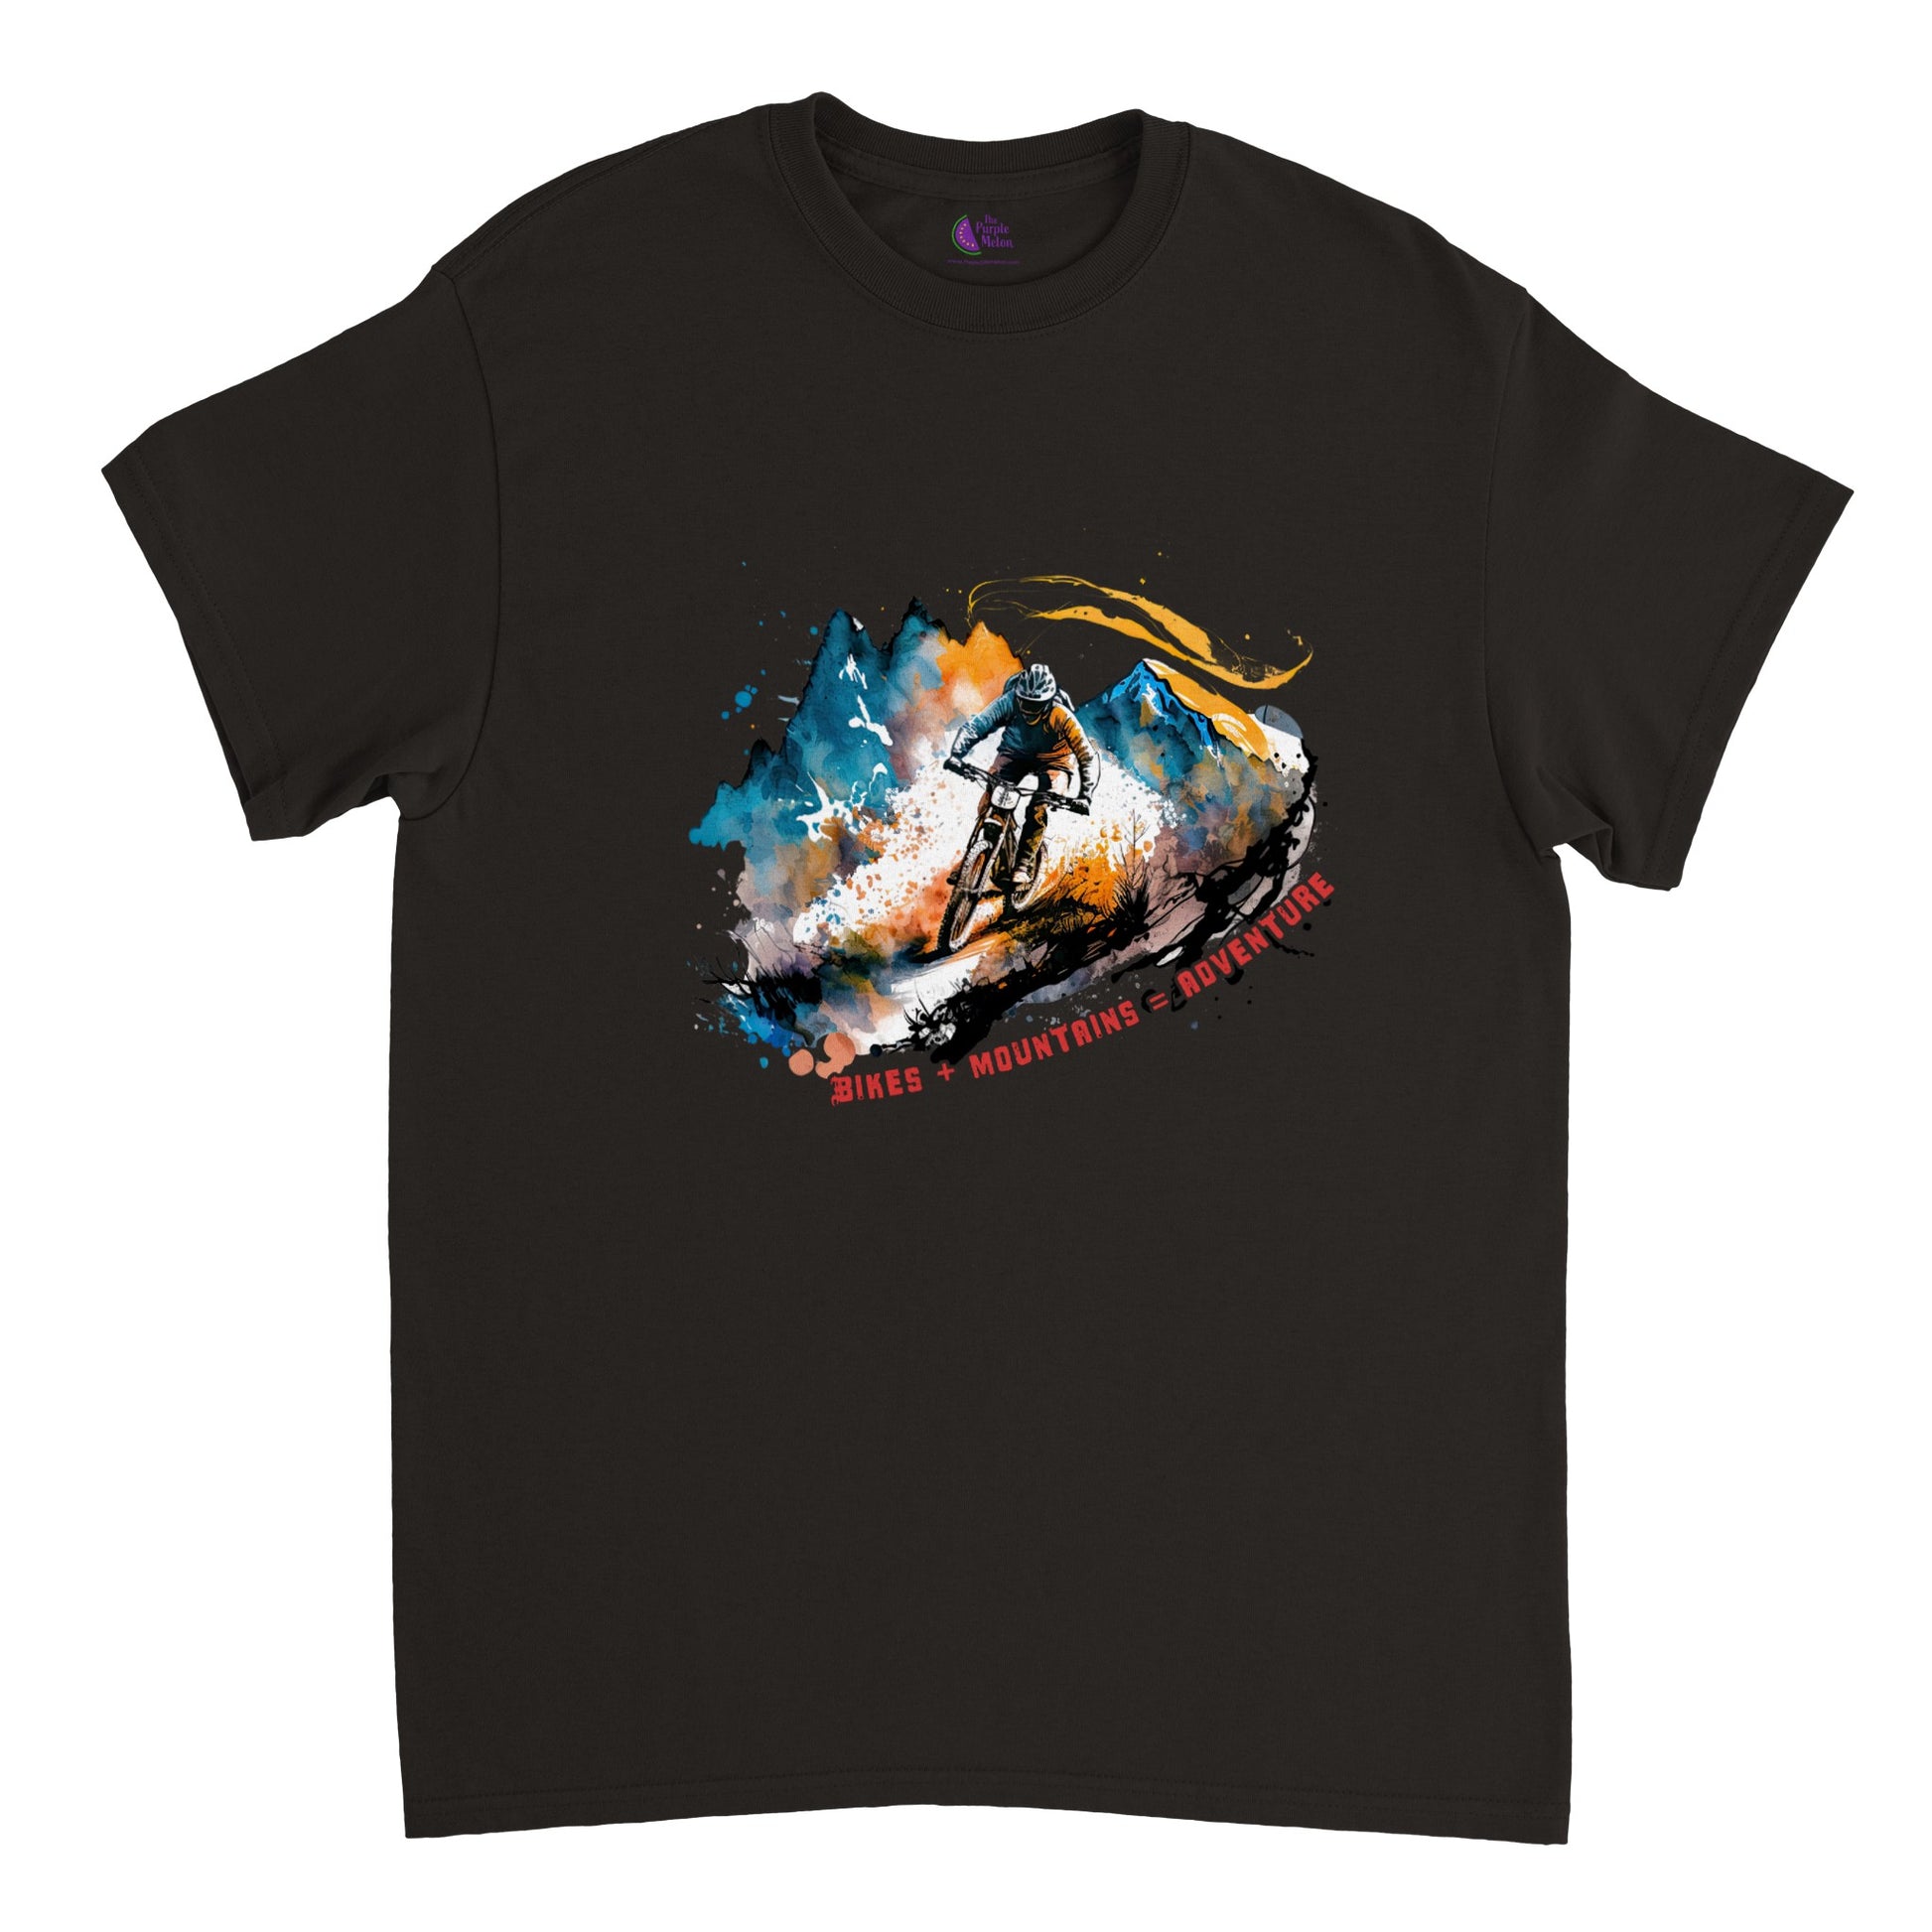 Black t-shirt with a mountain bike print with the caption Bikes + Mountains = Adventure